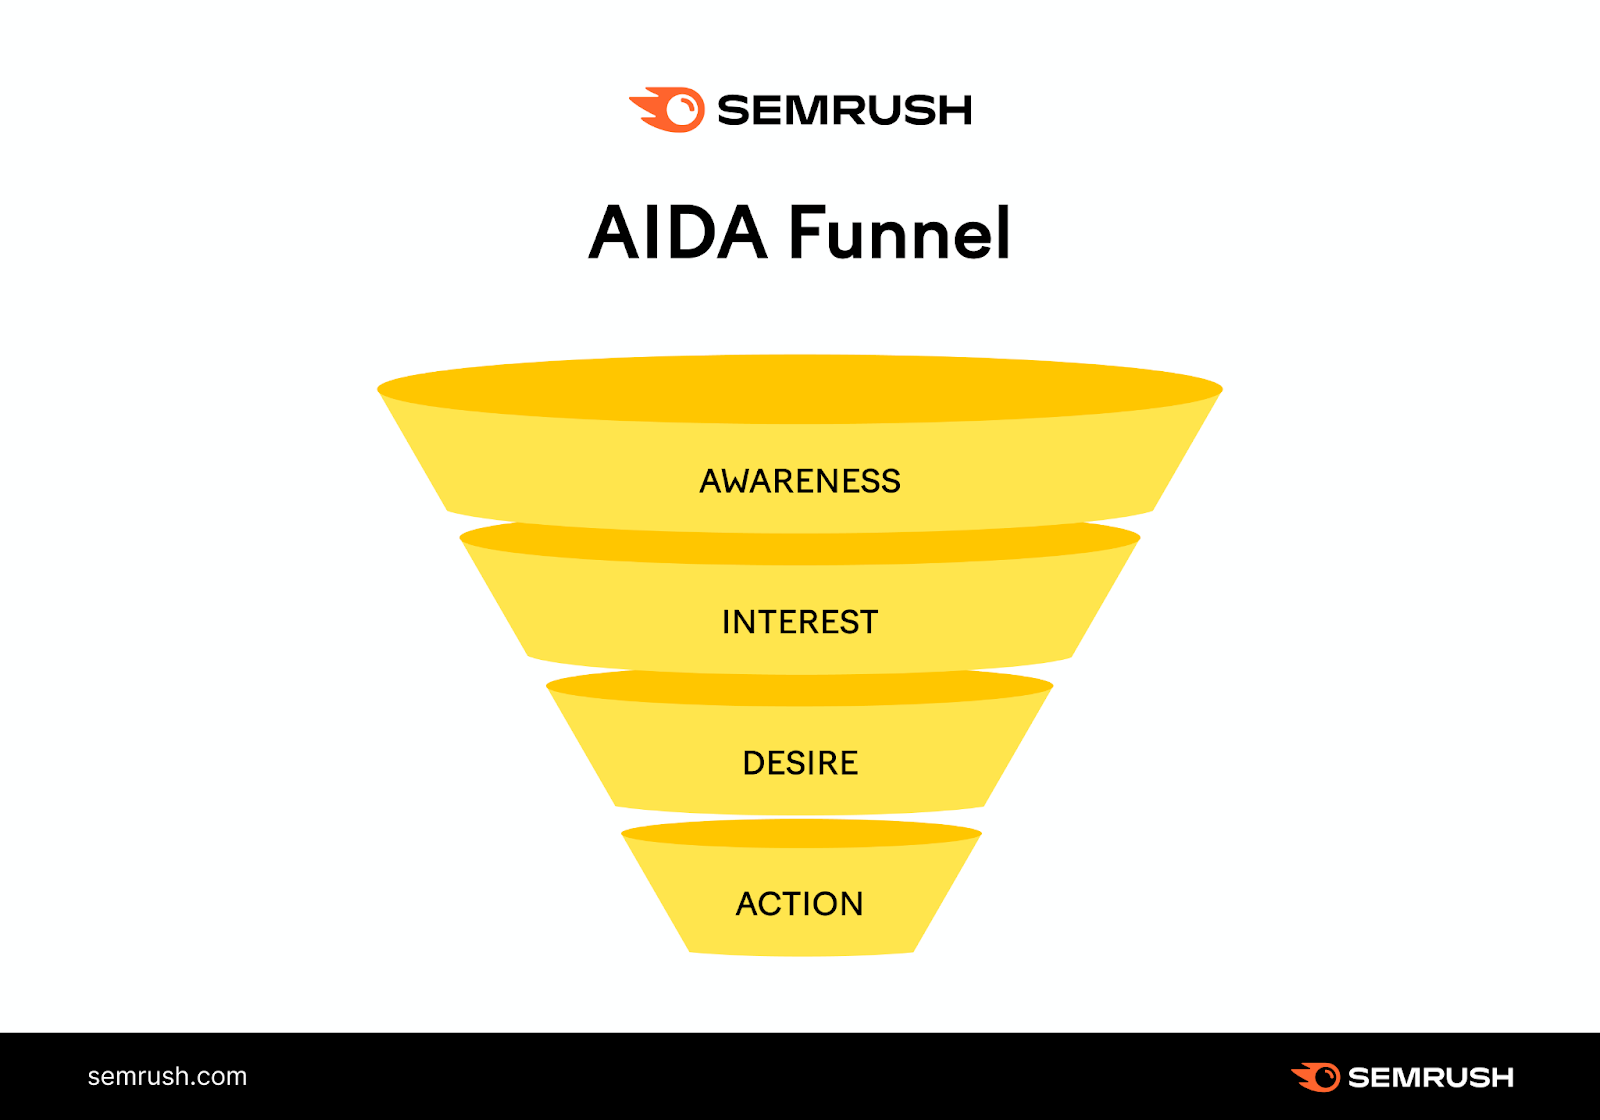 The 4 types of keywords (awareness, interest, desire, action) and their corresponding marketing funnel stages.